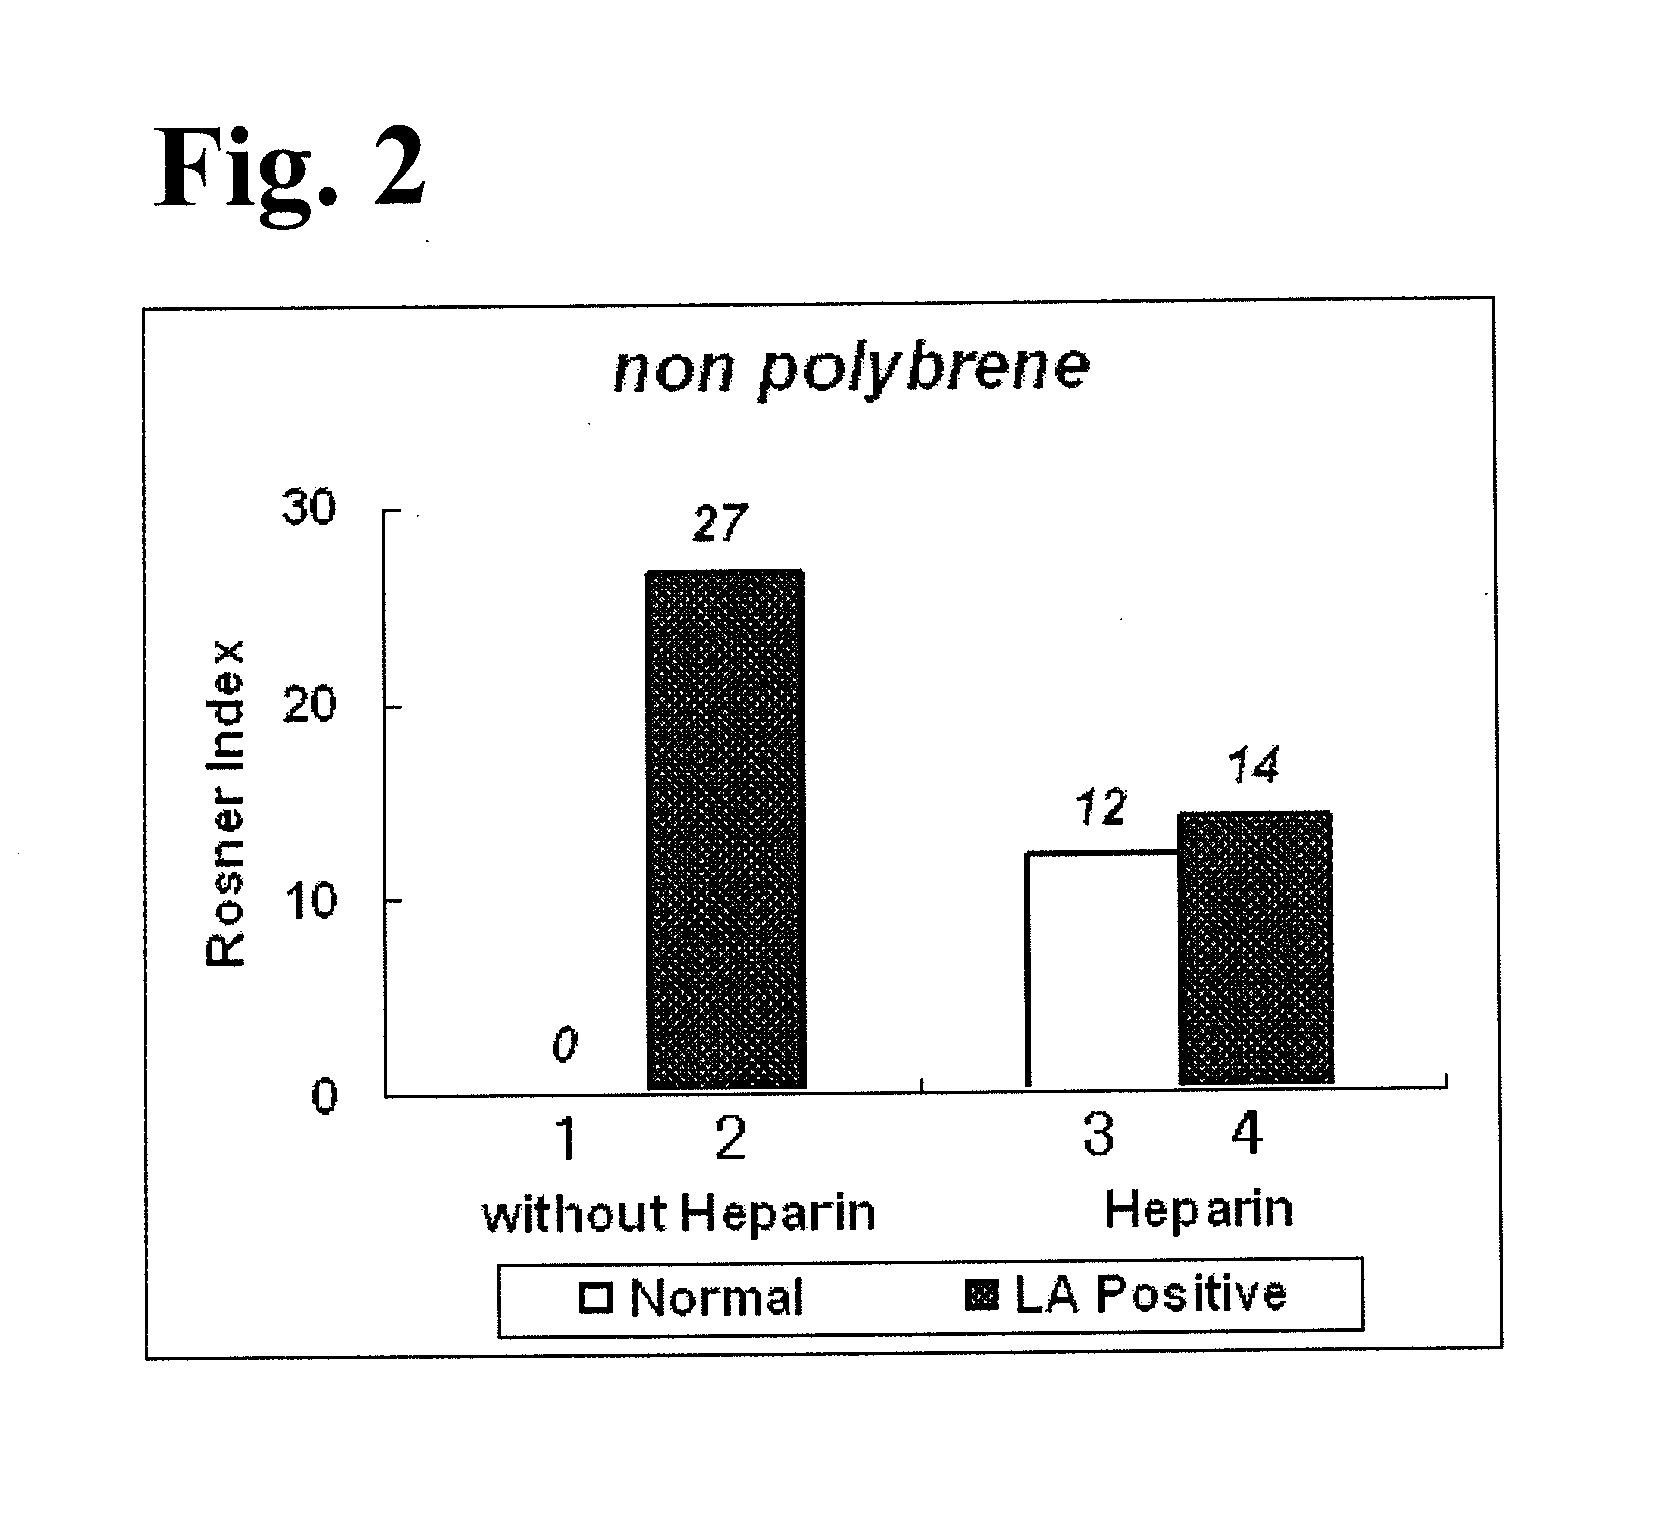 Activated partial thromboplastin time measuring reagent, activated partial thromboplastin time measuring method, and determination method for determining presence or absence of blood coagulation inhibitor